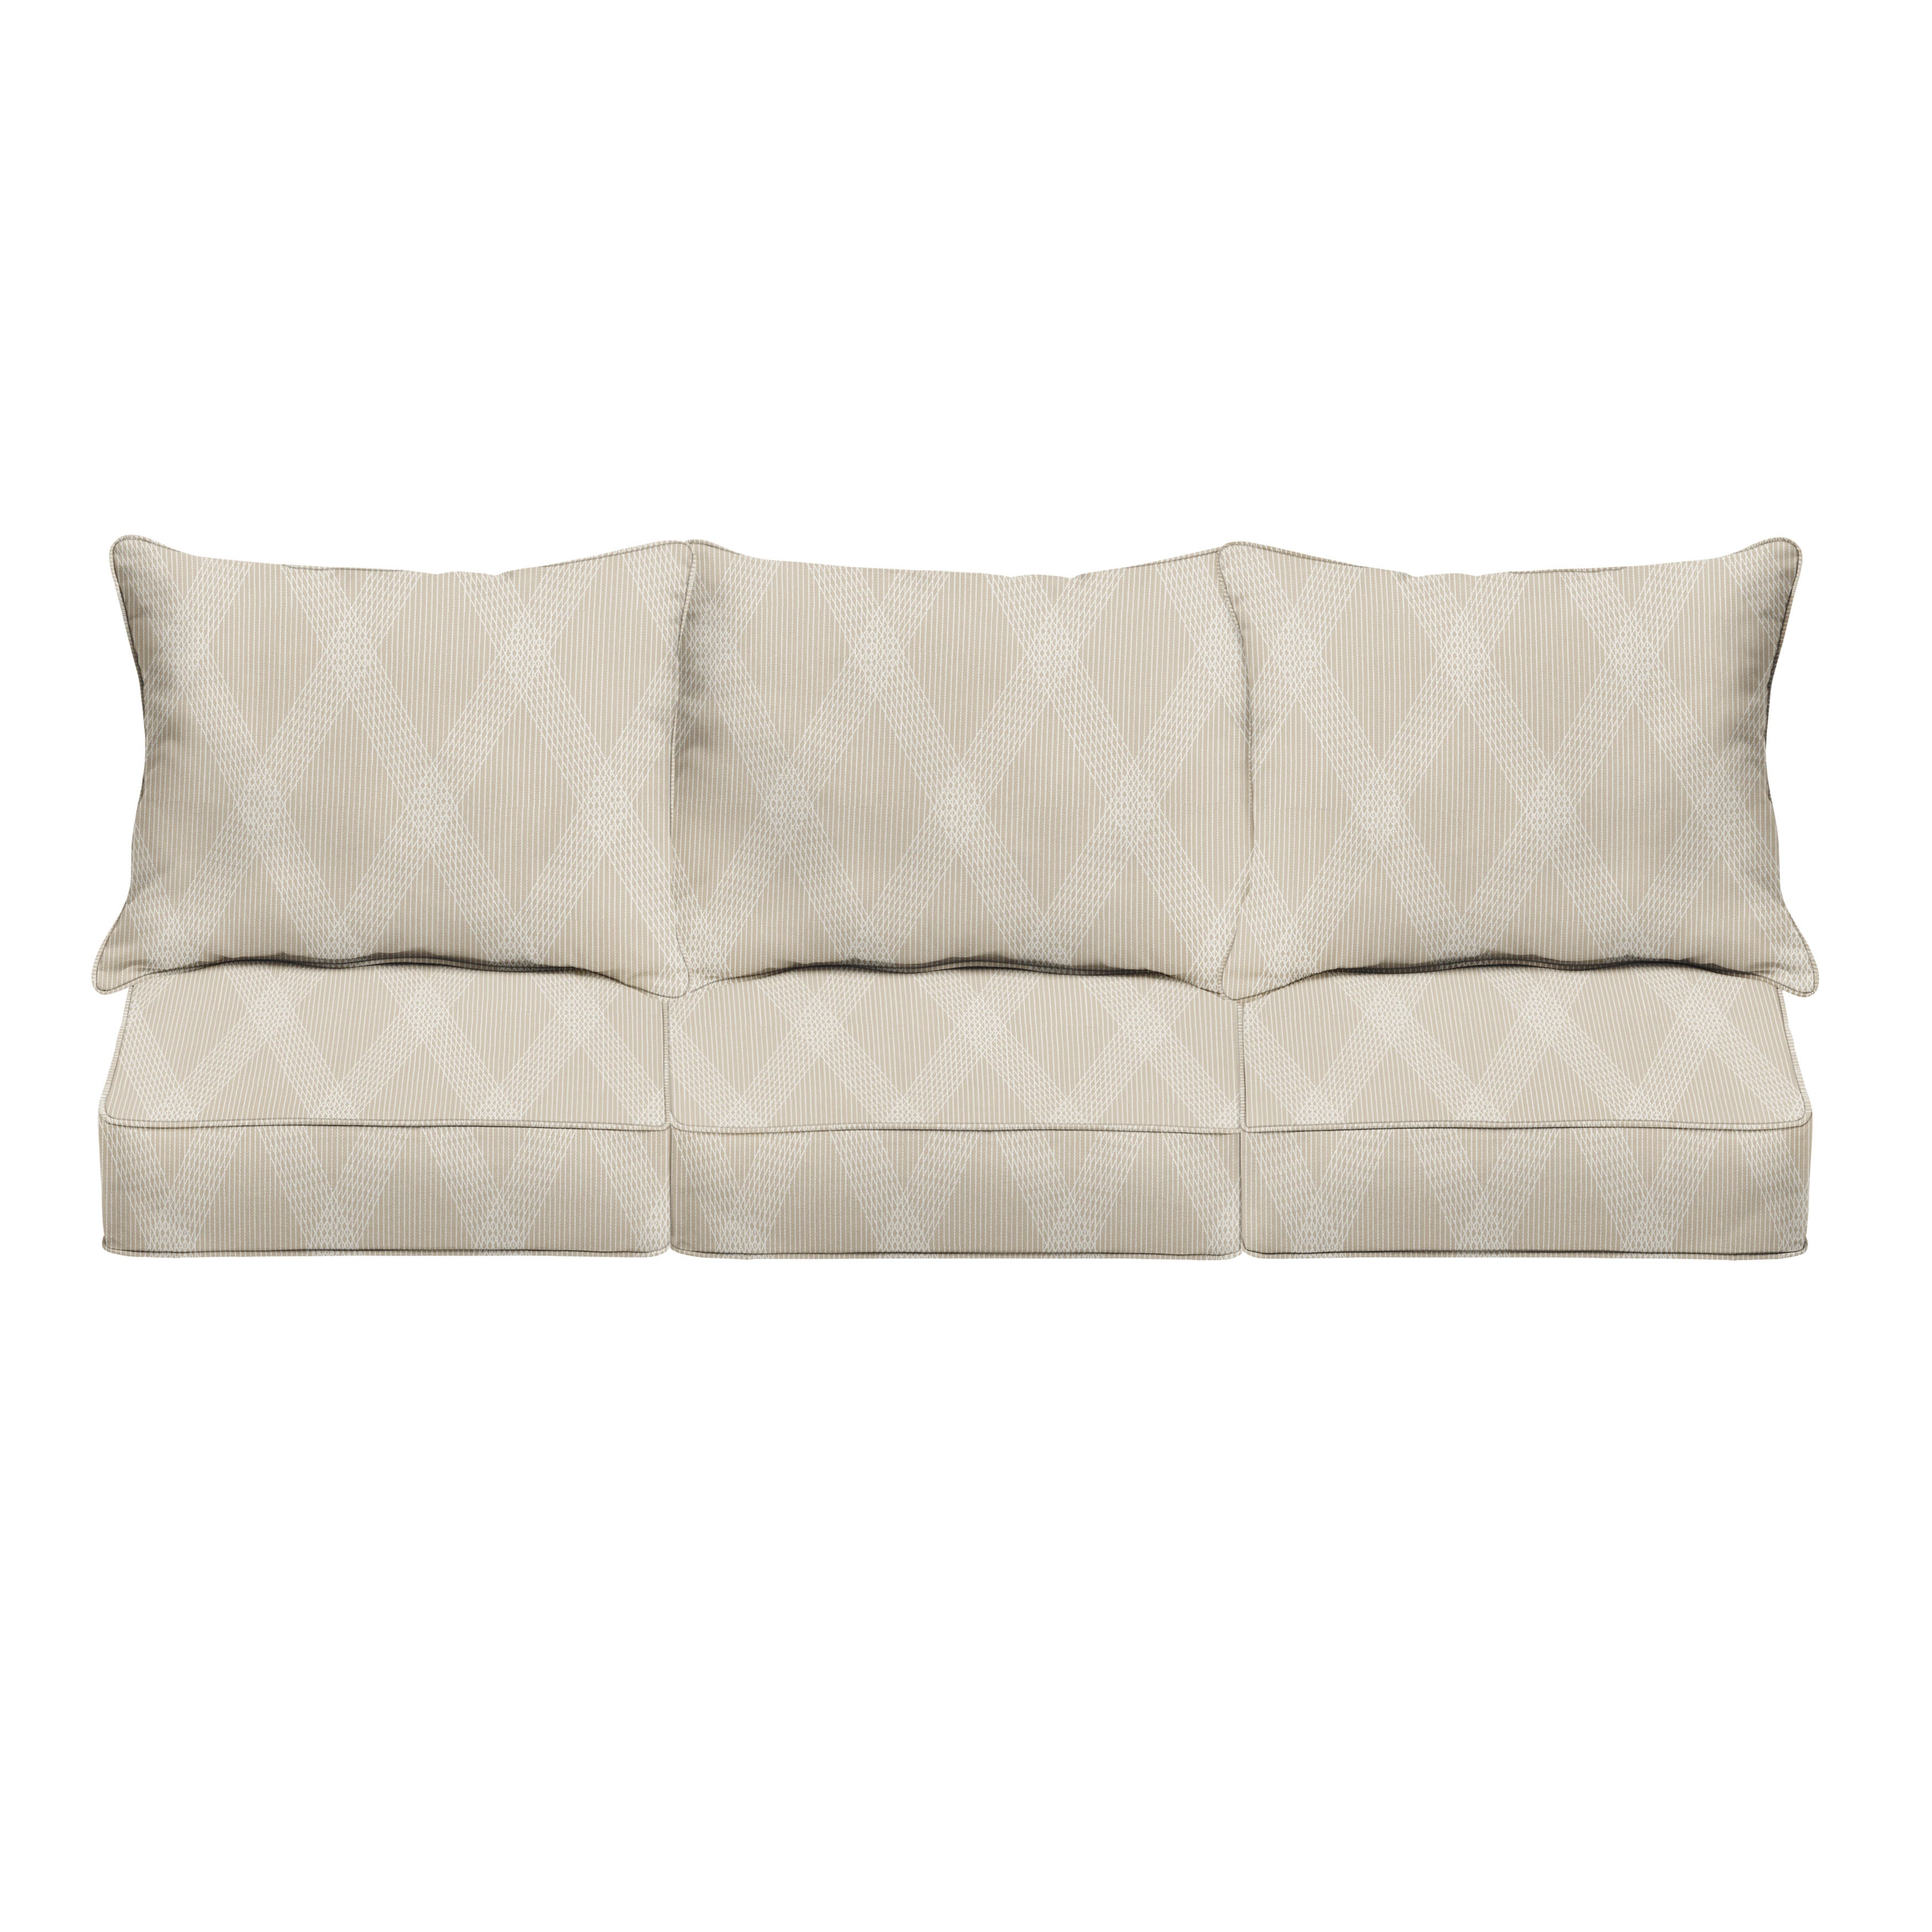 Outdura Square Outdoor Deep Seating Sofa Pillow and Cushion Set